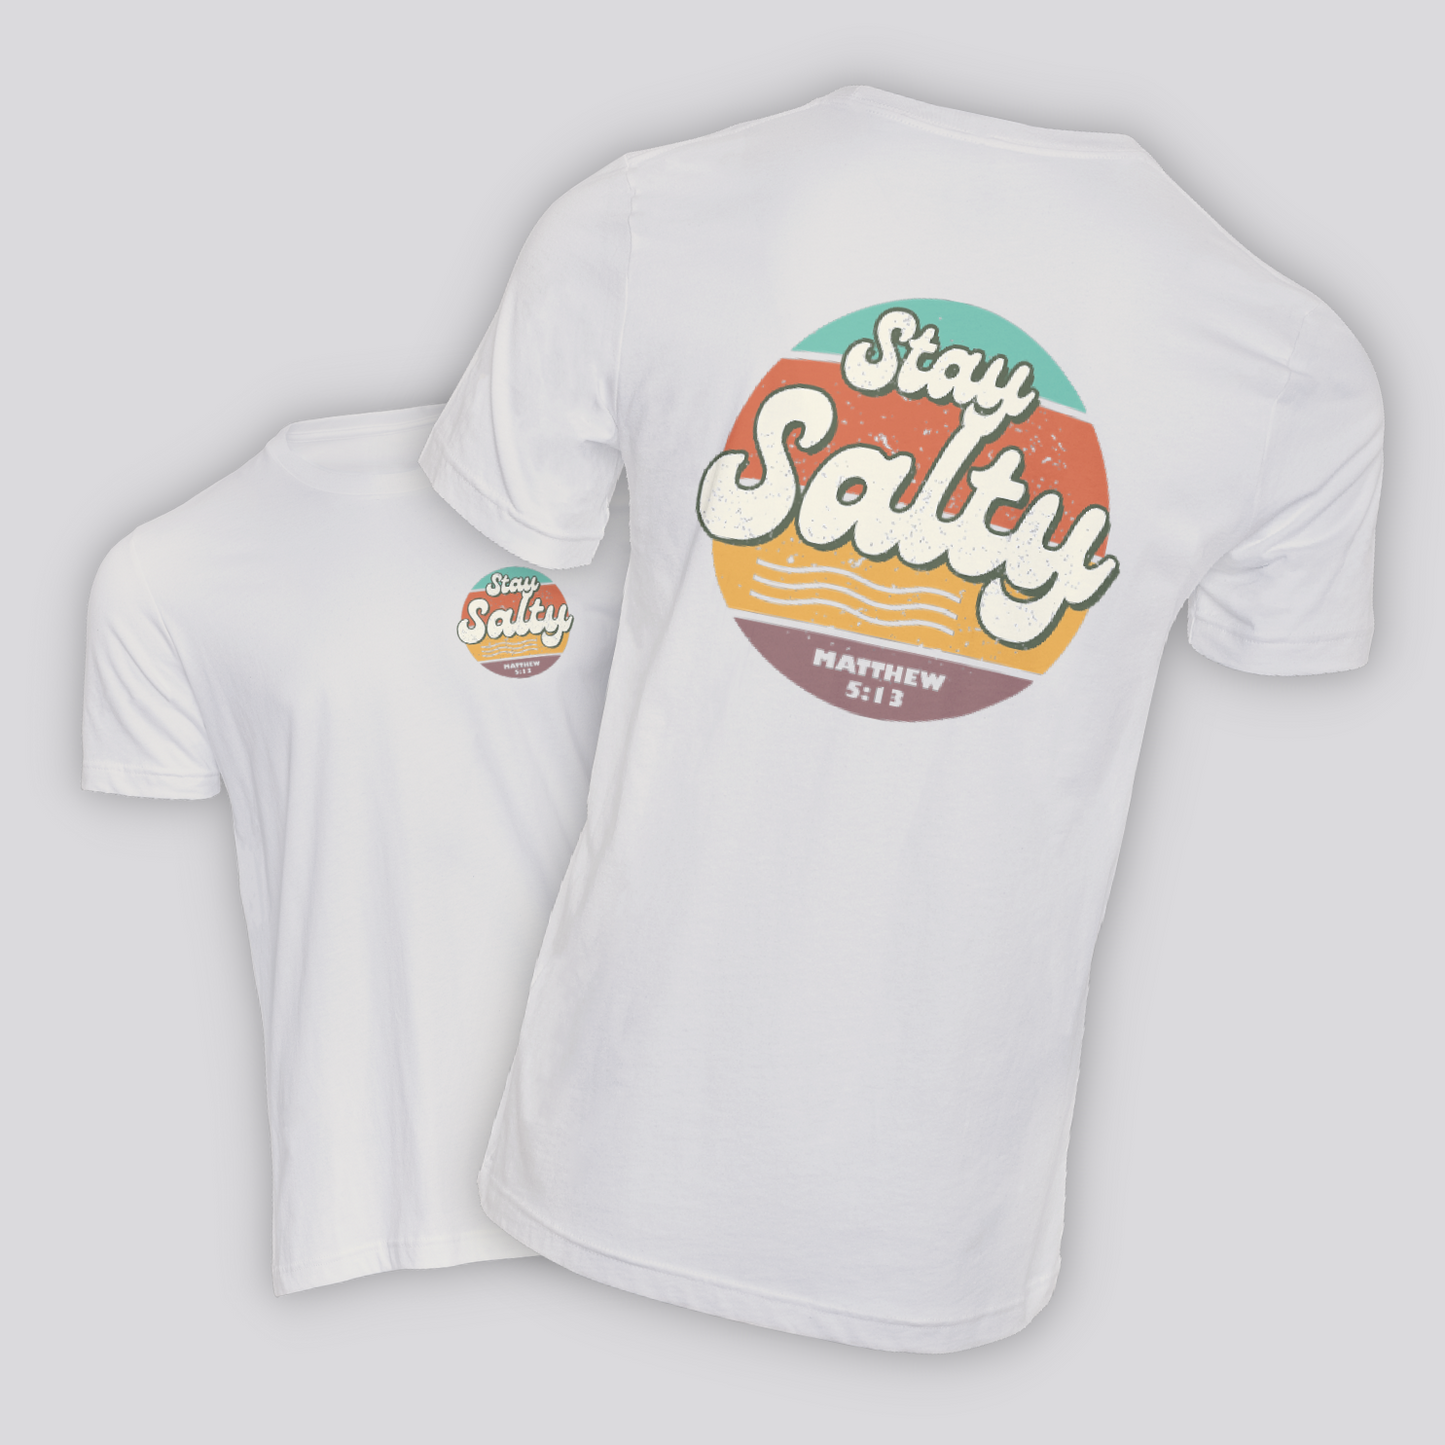 Stay Salty - Shirt with Pocket Design